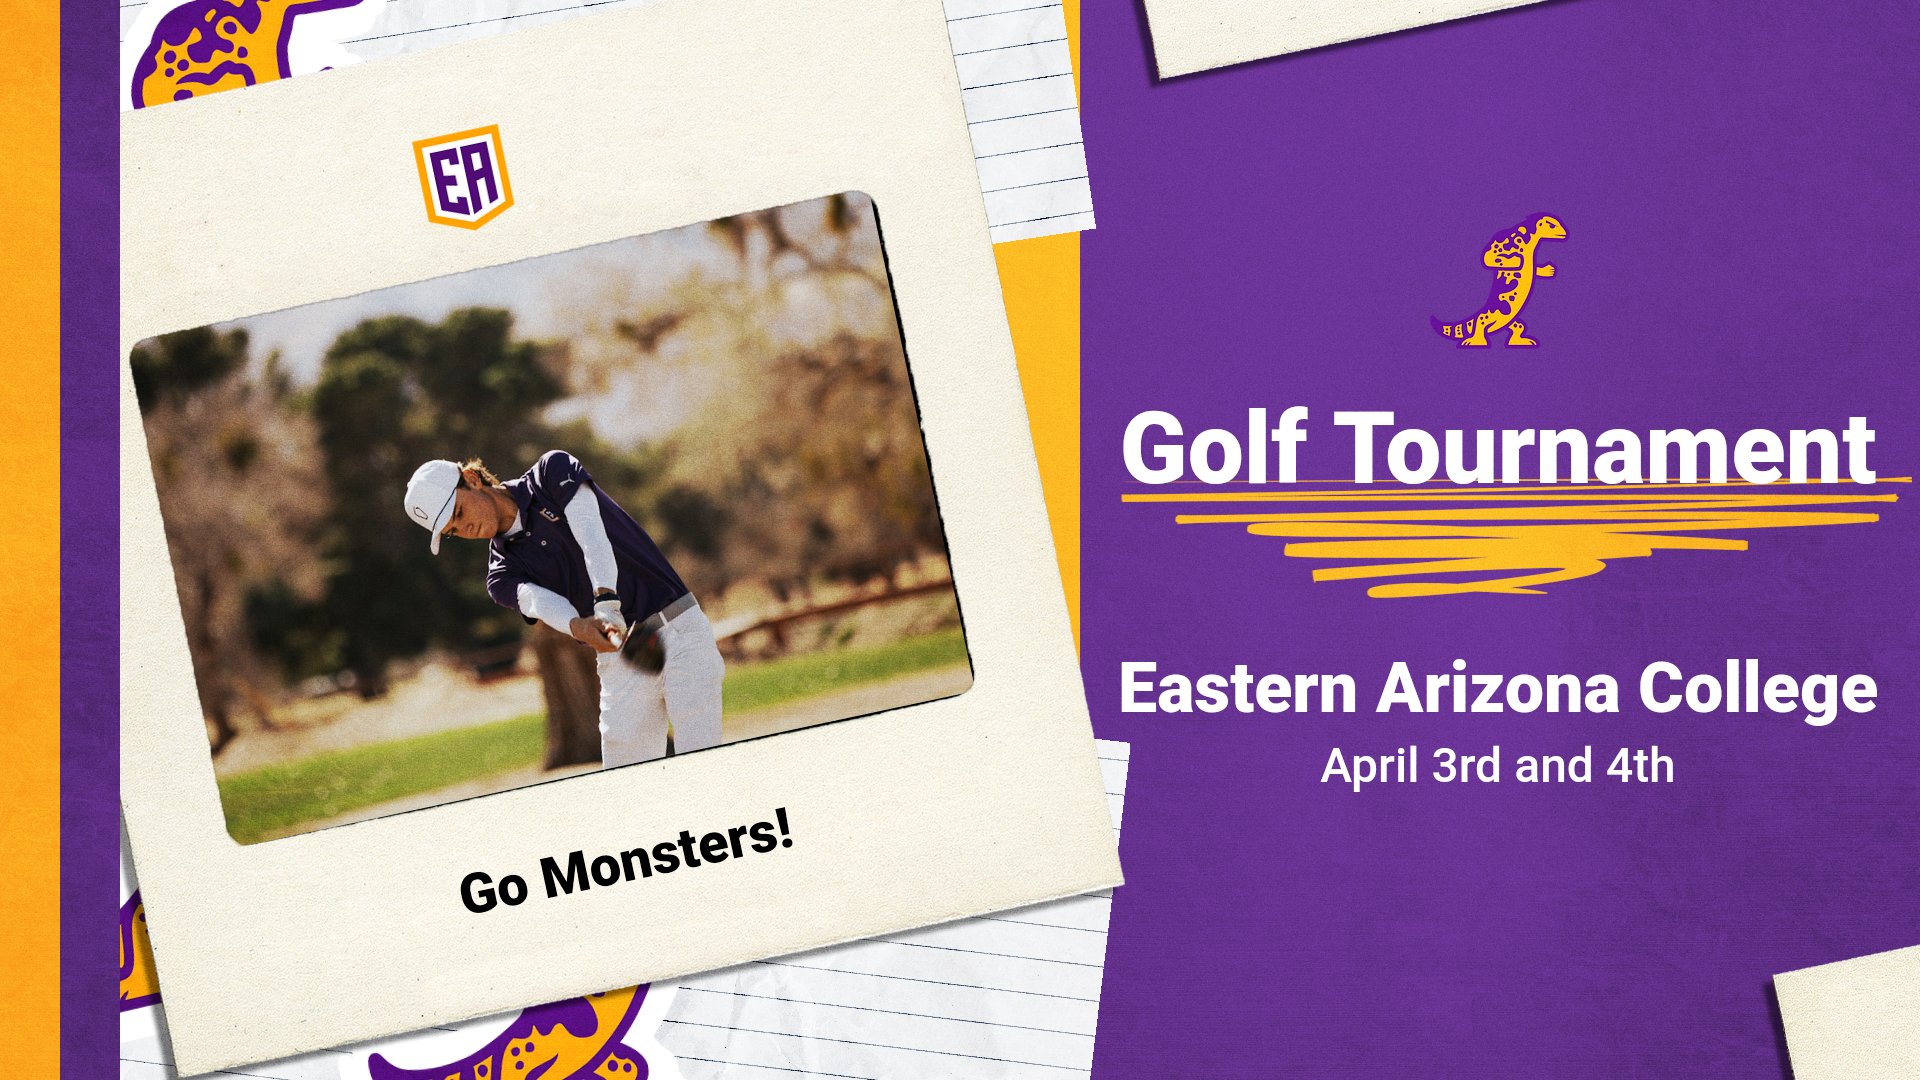 EAC Hosts Golf Tournament April 3rd and 4th